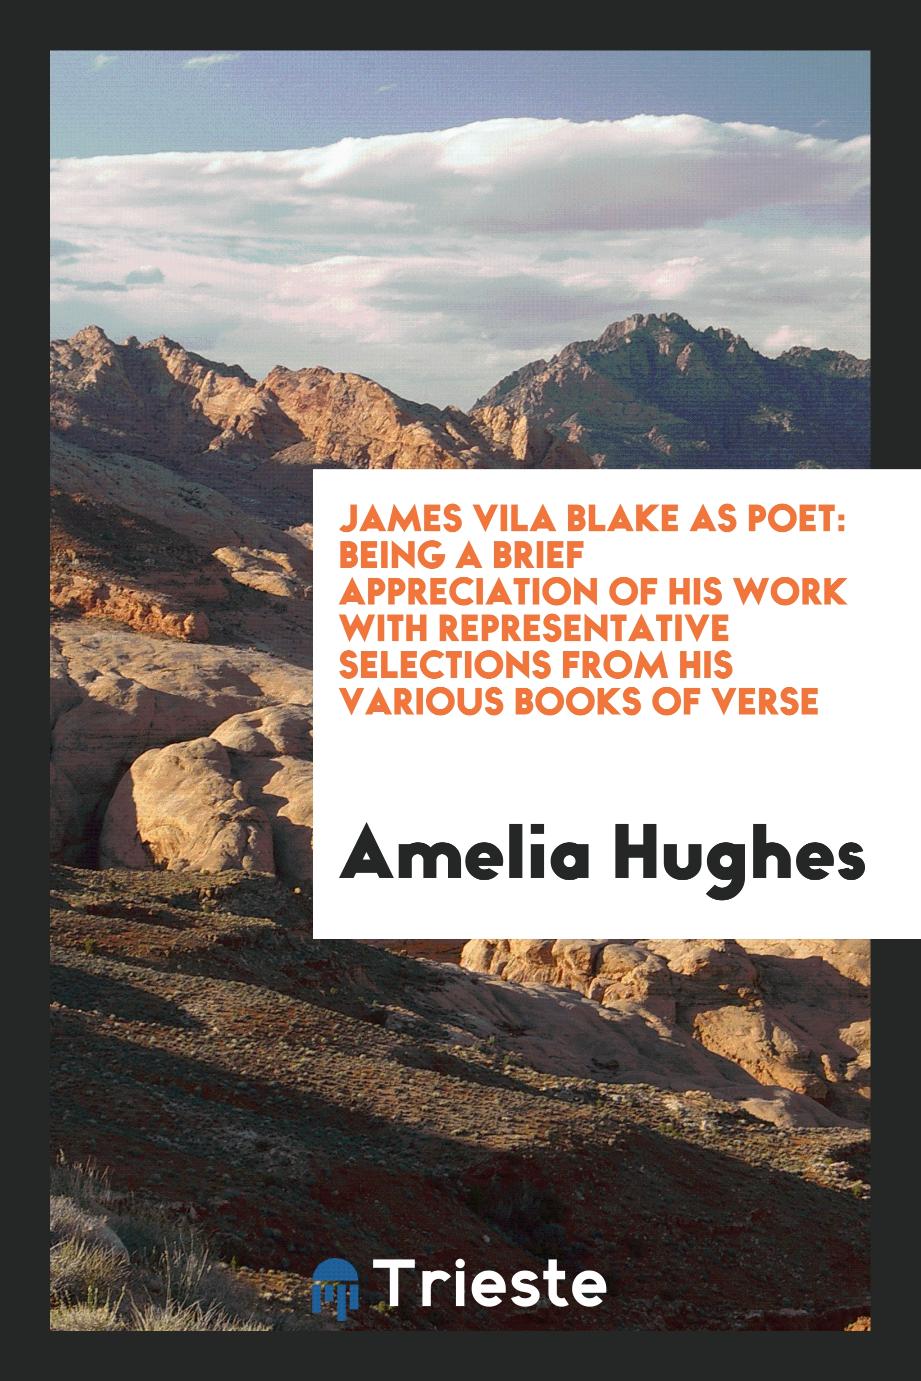 James Vila Blake as poet: being a brief appreciation of his work with representative selections from his various books of verse